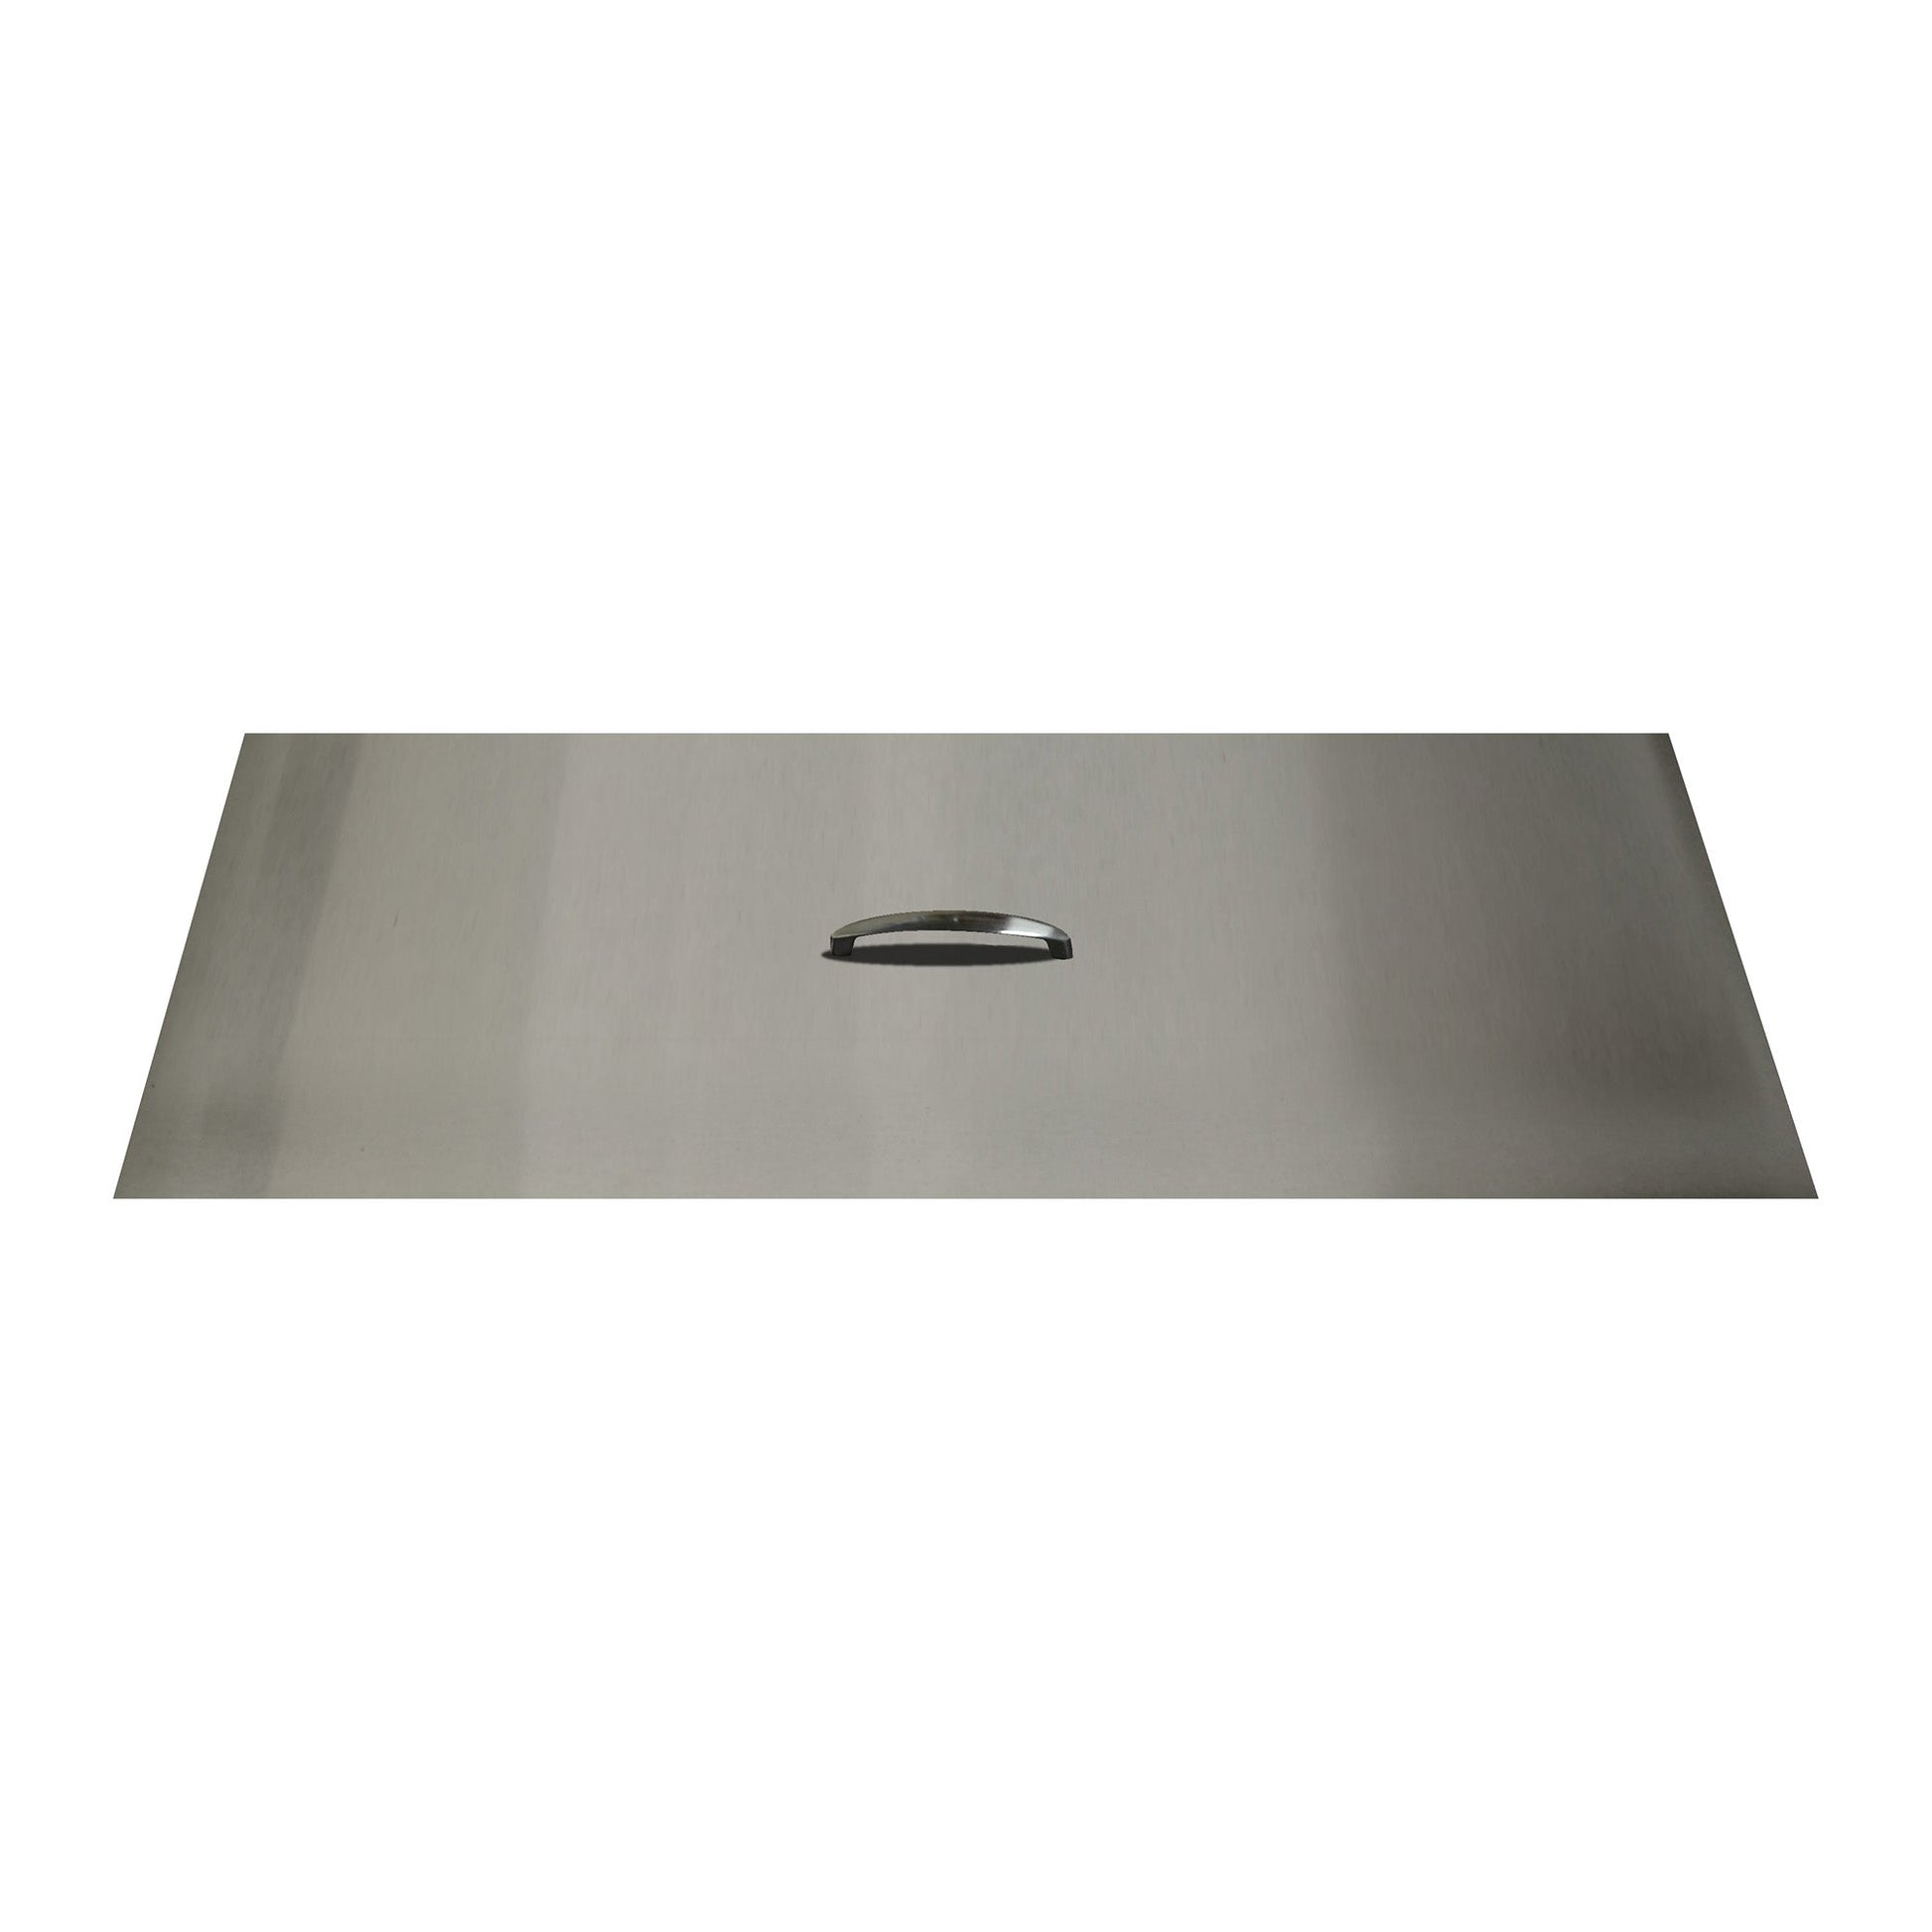 The Outdoor Plus 31" x 21" Stainless Steel Rectangular Fire Pit Lid Cover